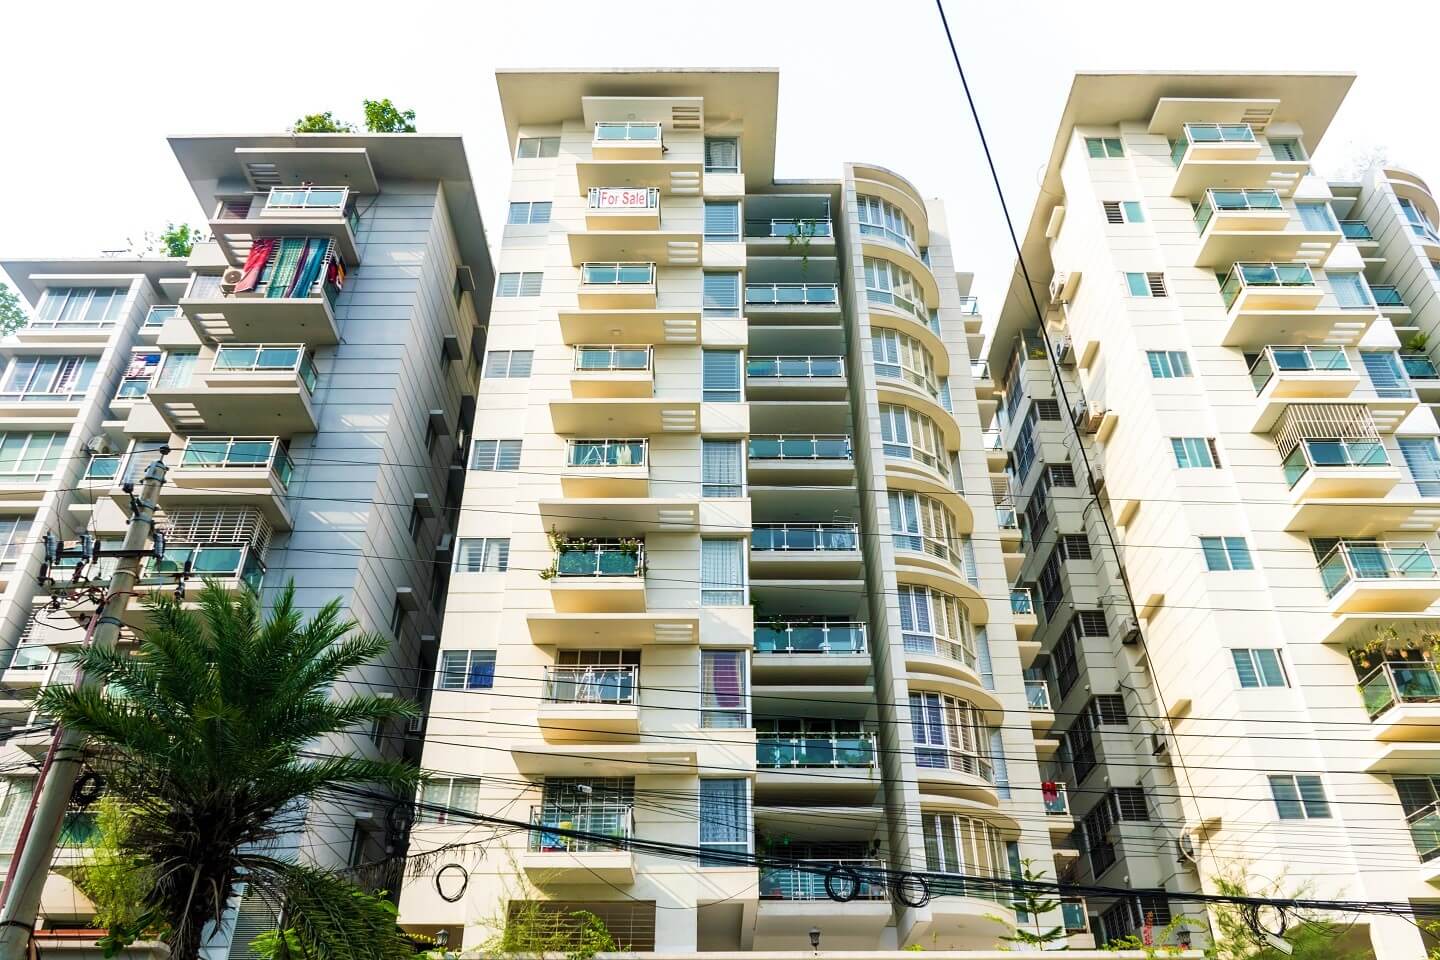 Don't miss the chance of grabbing such luxurious flats for sale in Dhaka for yourself